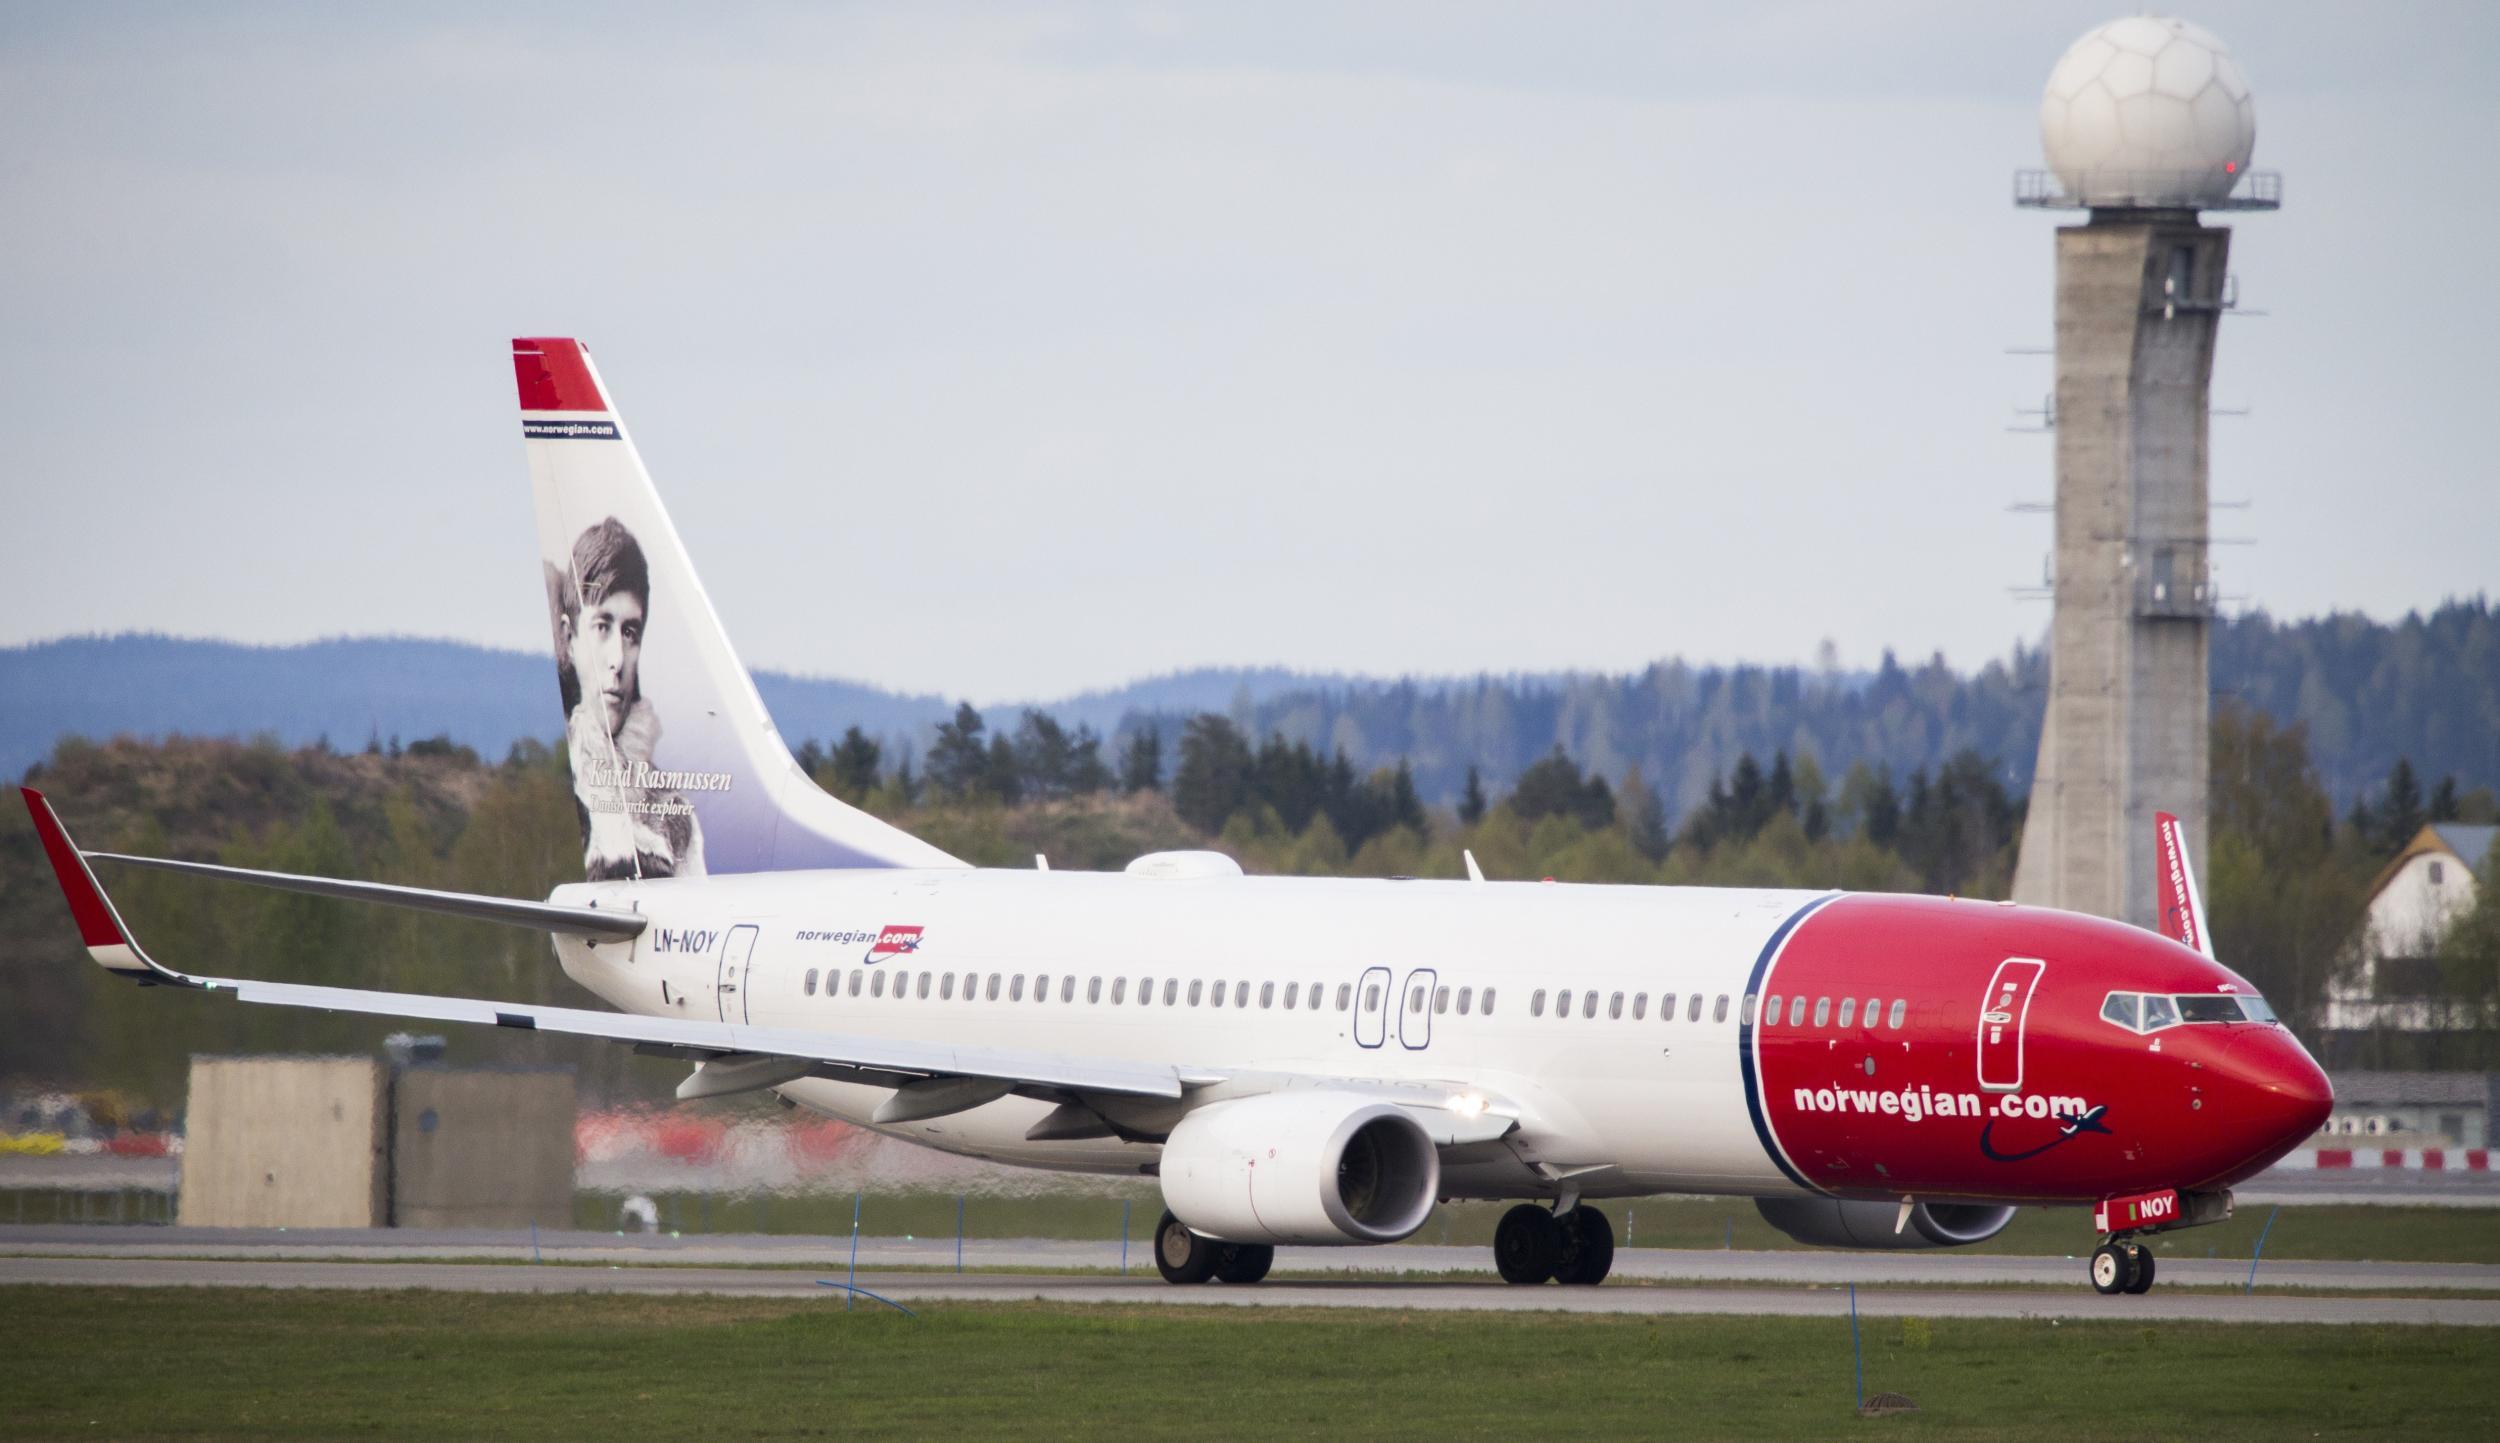 US pilots are complaining that Norwegian's low-cost transatlantic flights will cost them their jobs